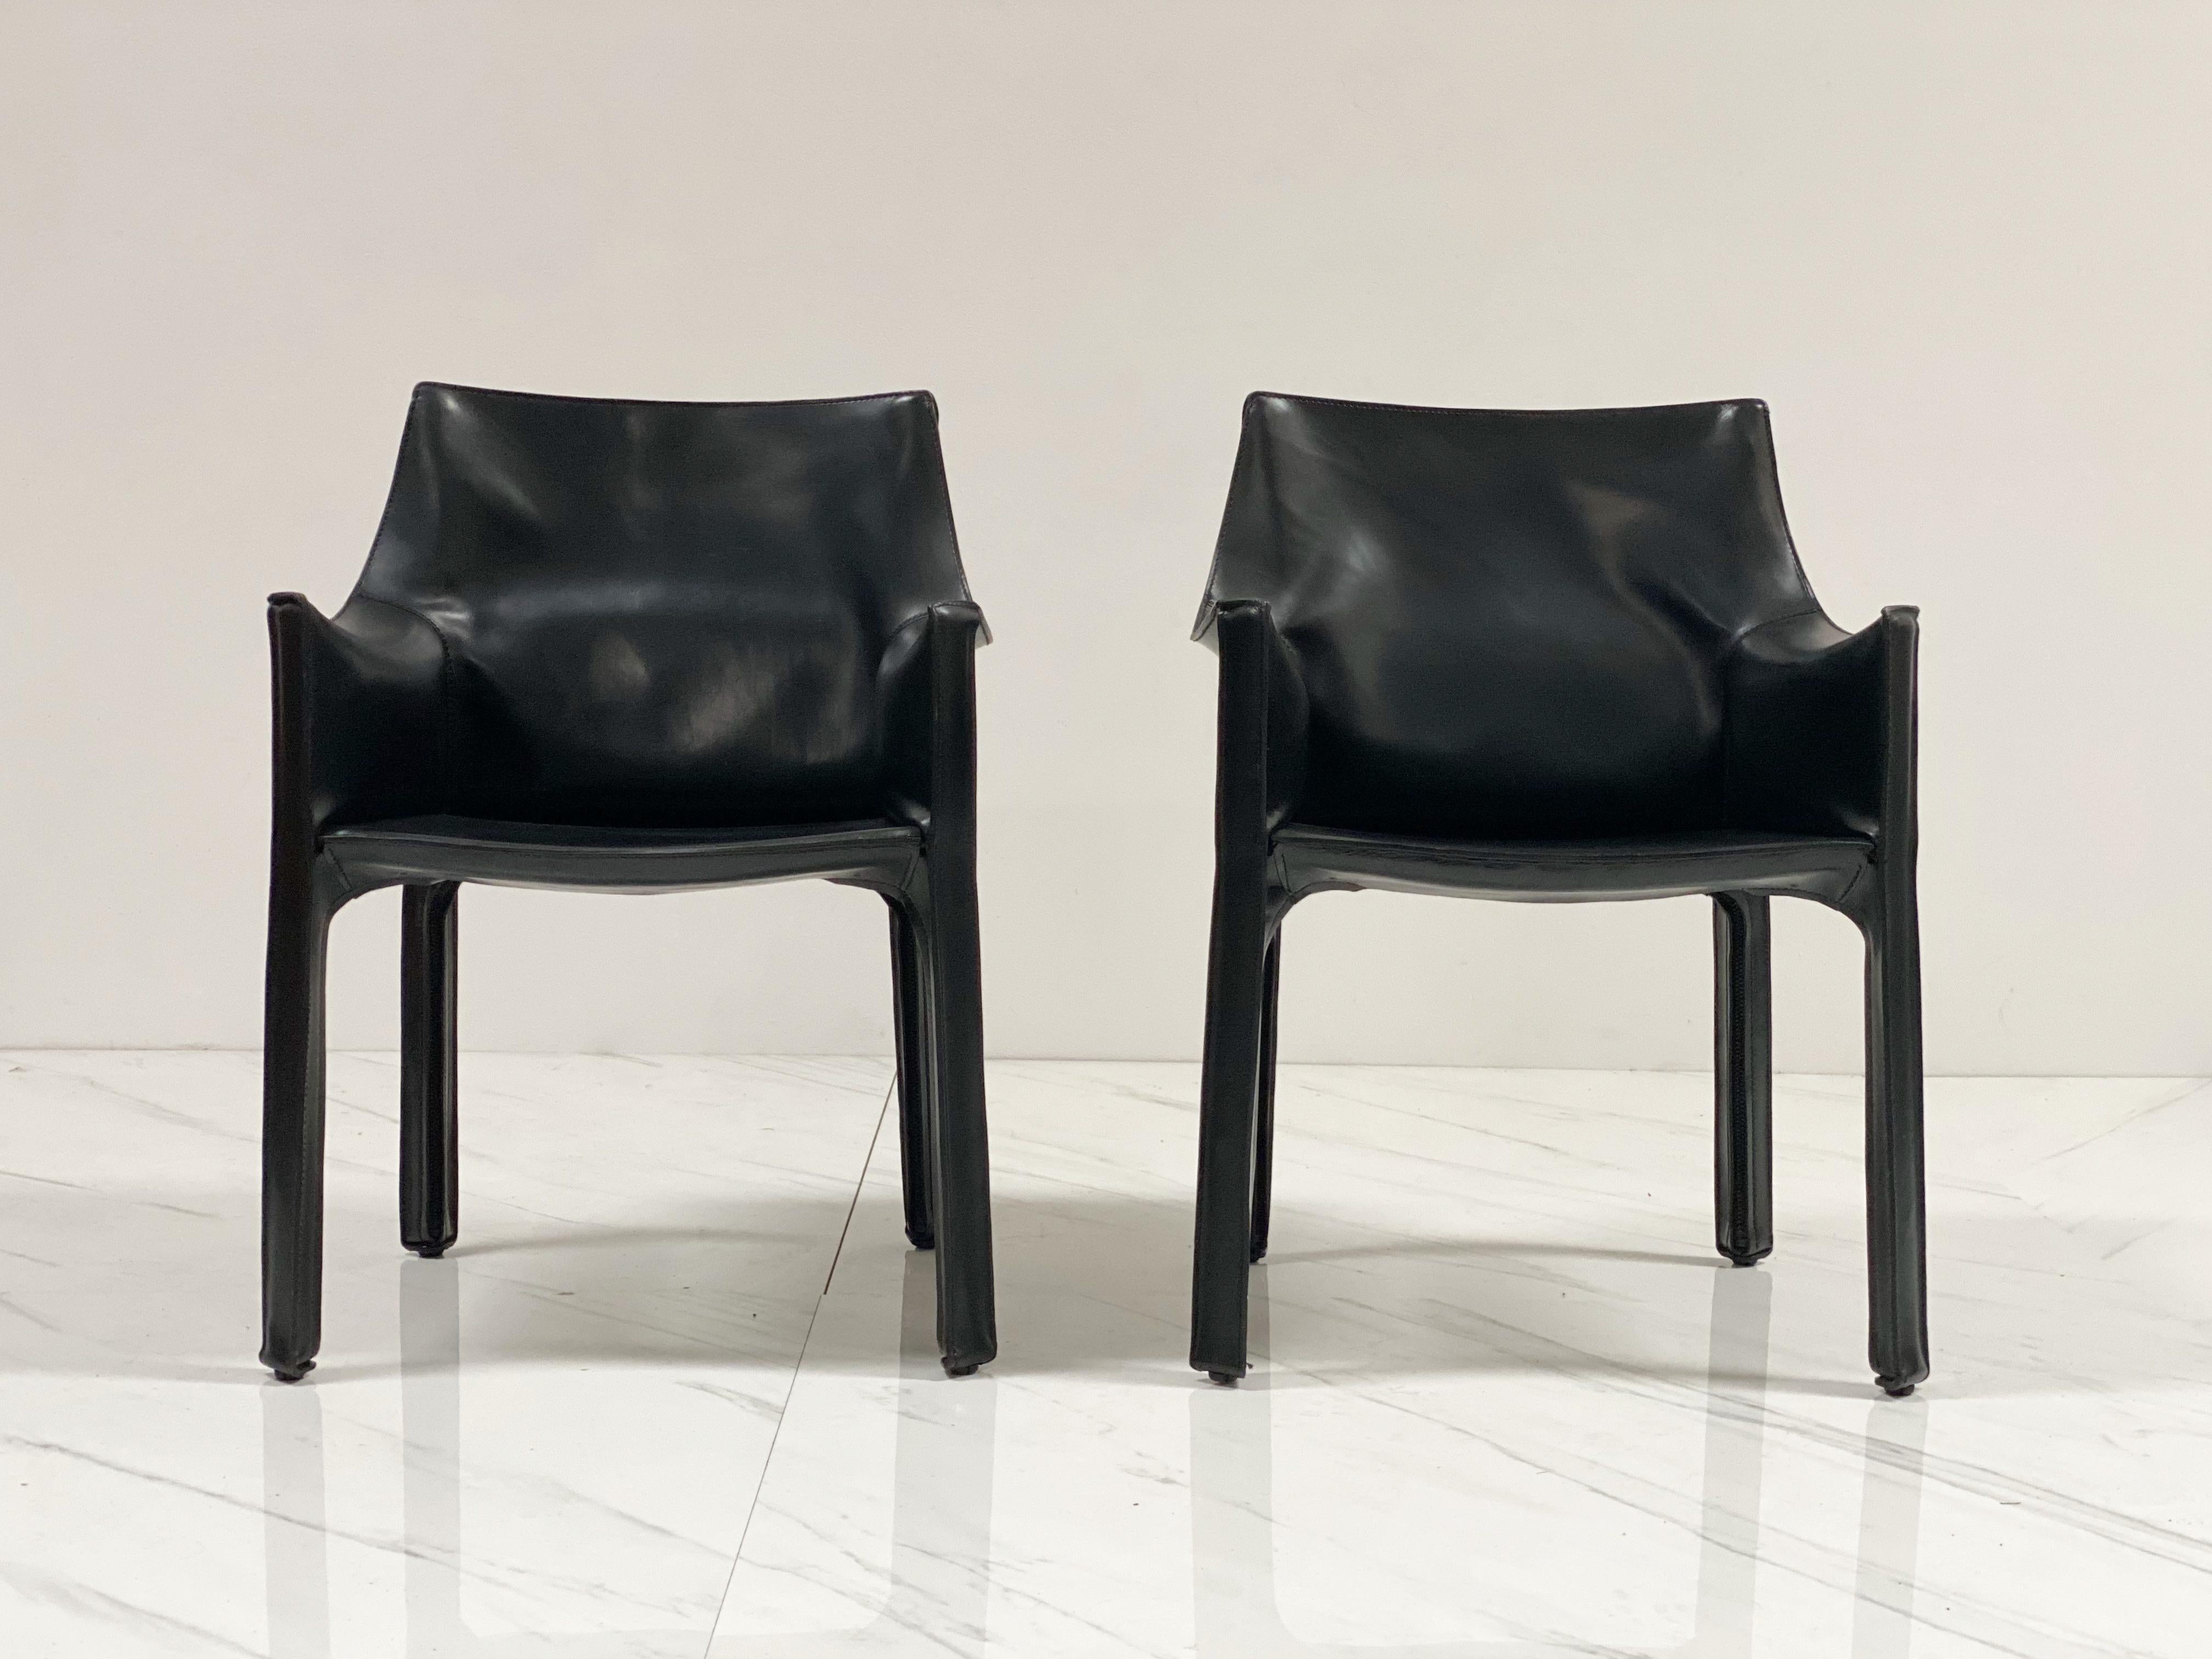 Steel Early Production 'Cab' Armchairs by Mario Bellini for Cassina, c 1978, Signed